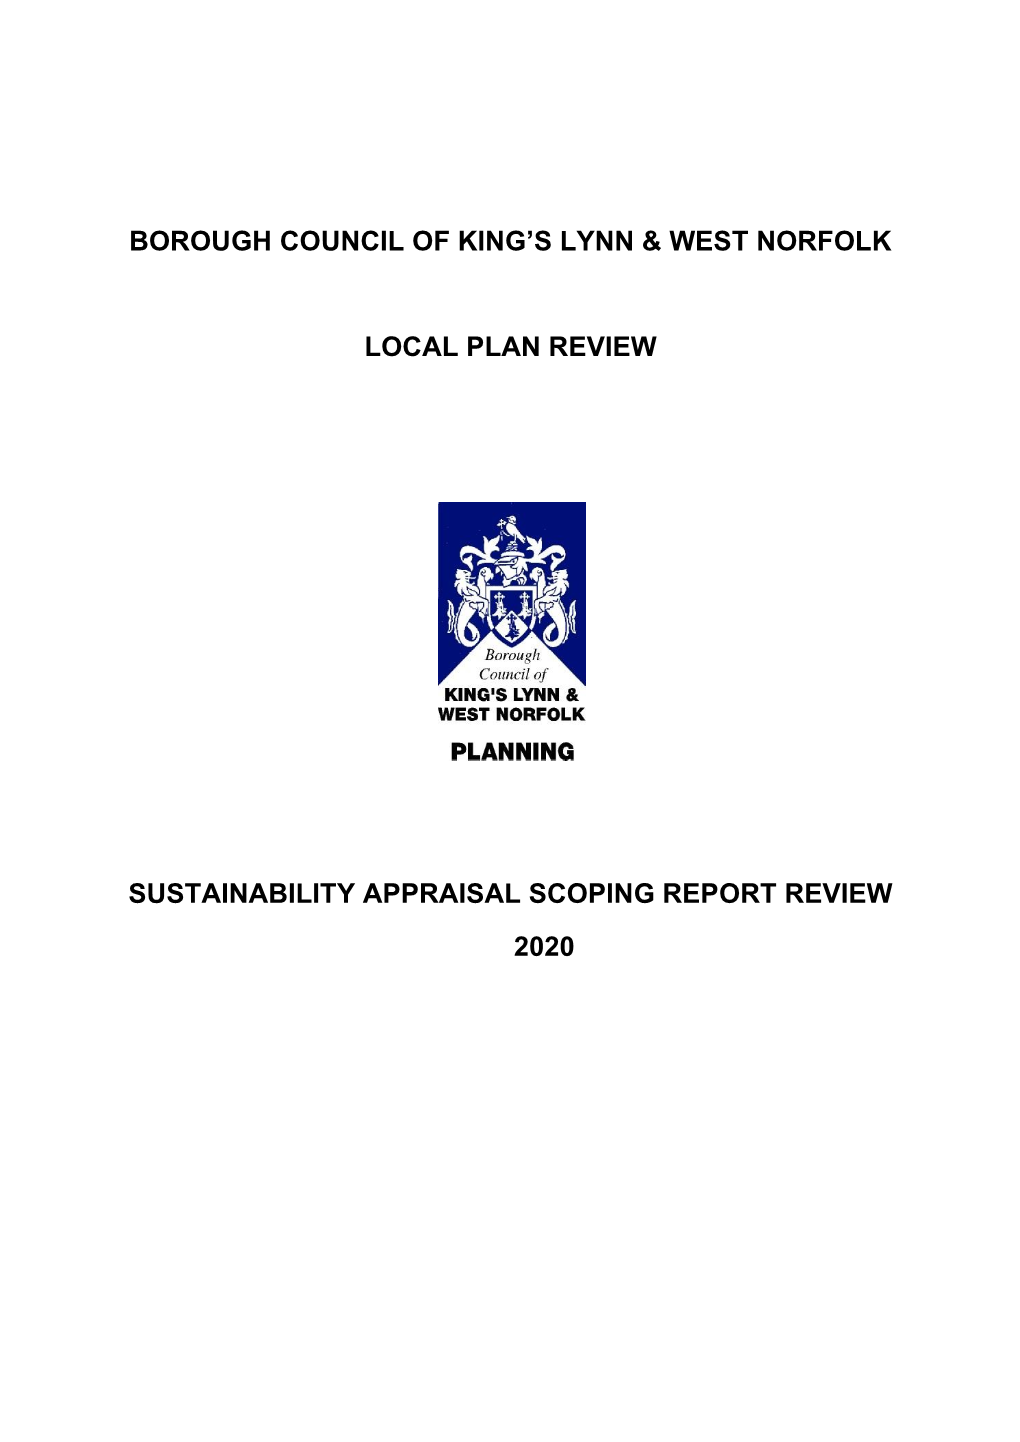 Sustainability Appraisal Scoping Report Review 2020